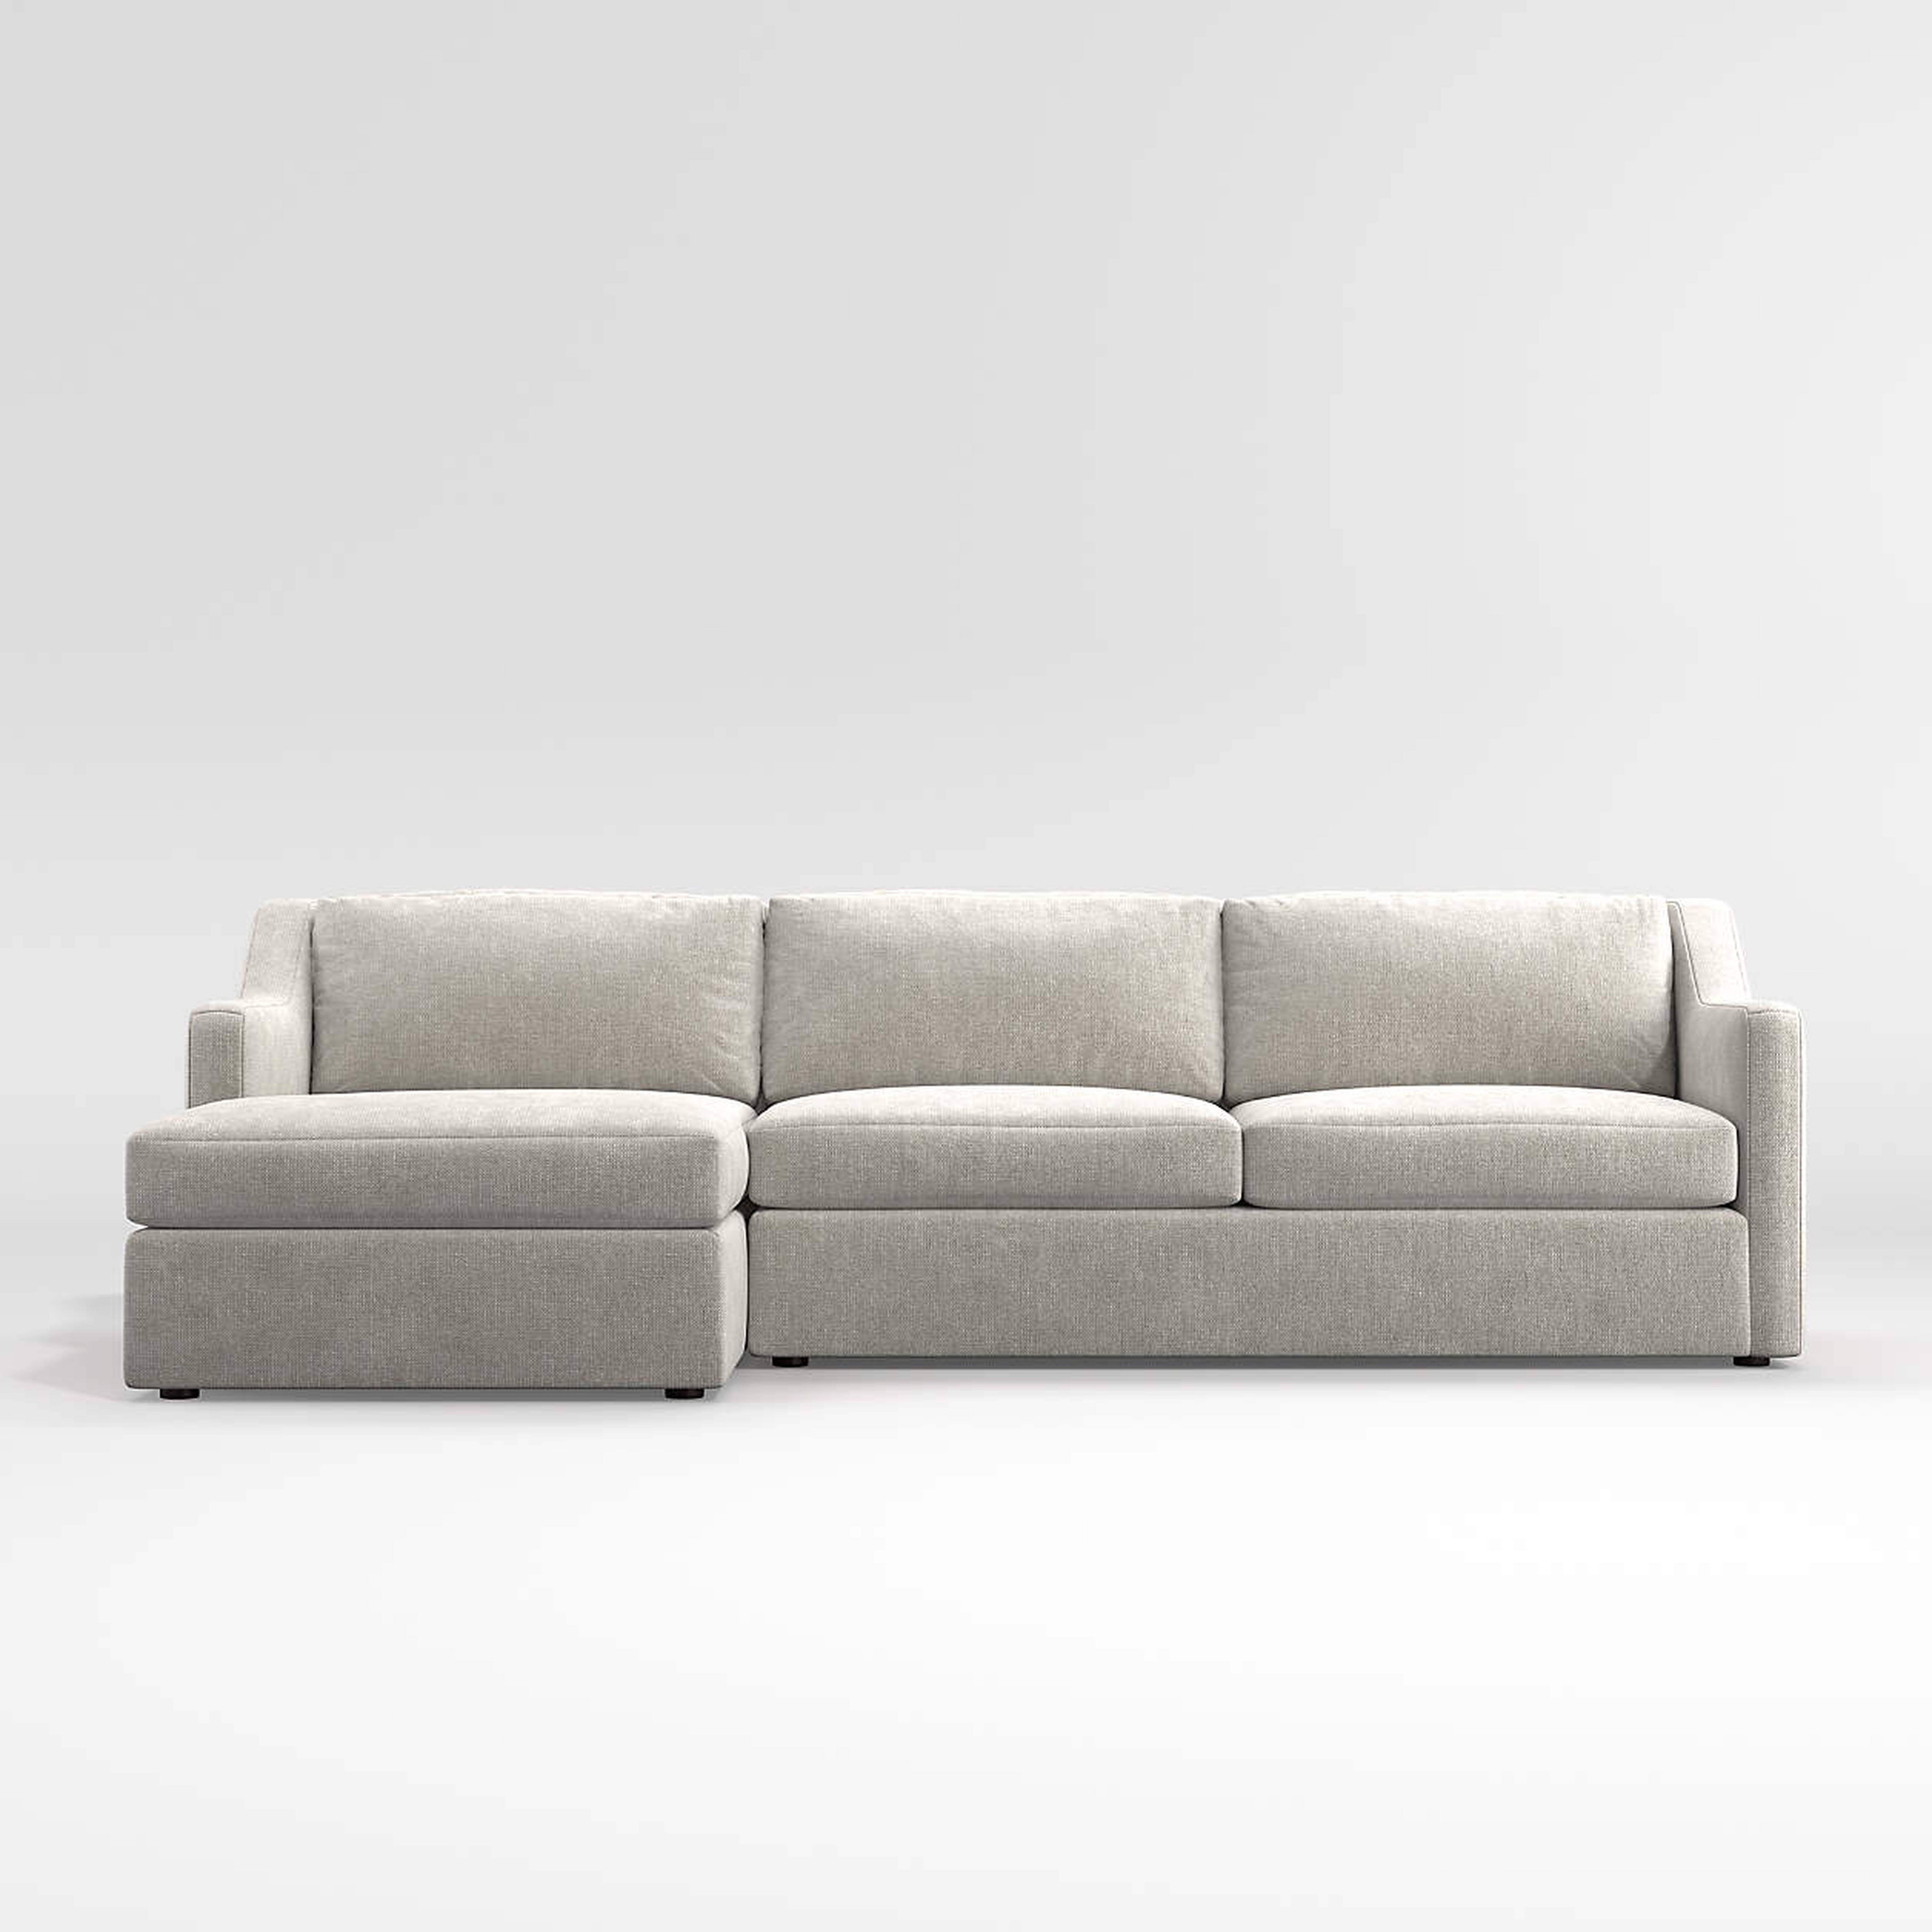 Notch 2-Piece Sectional - Duet Natural  (Right-Arm Chaise, Left-Arm Sofa) 115.5"Wx64"Dx34.5"H - Crate and Barrel